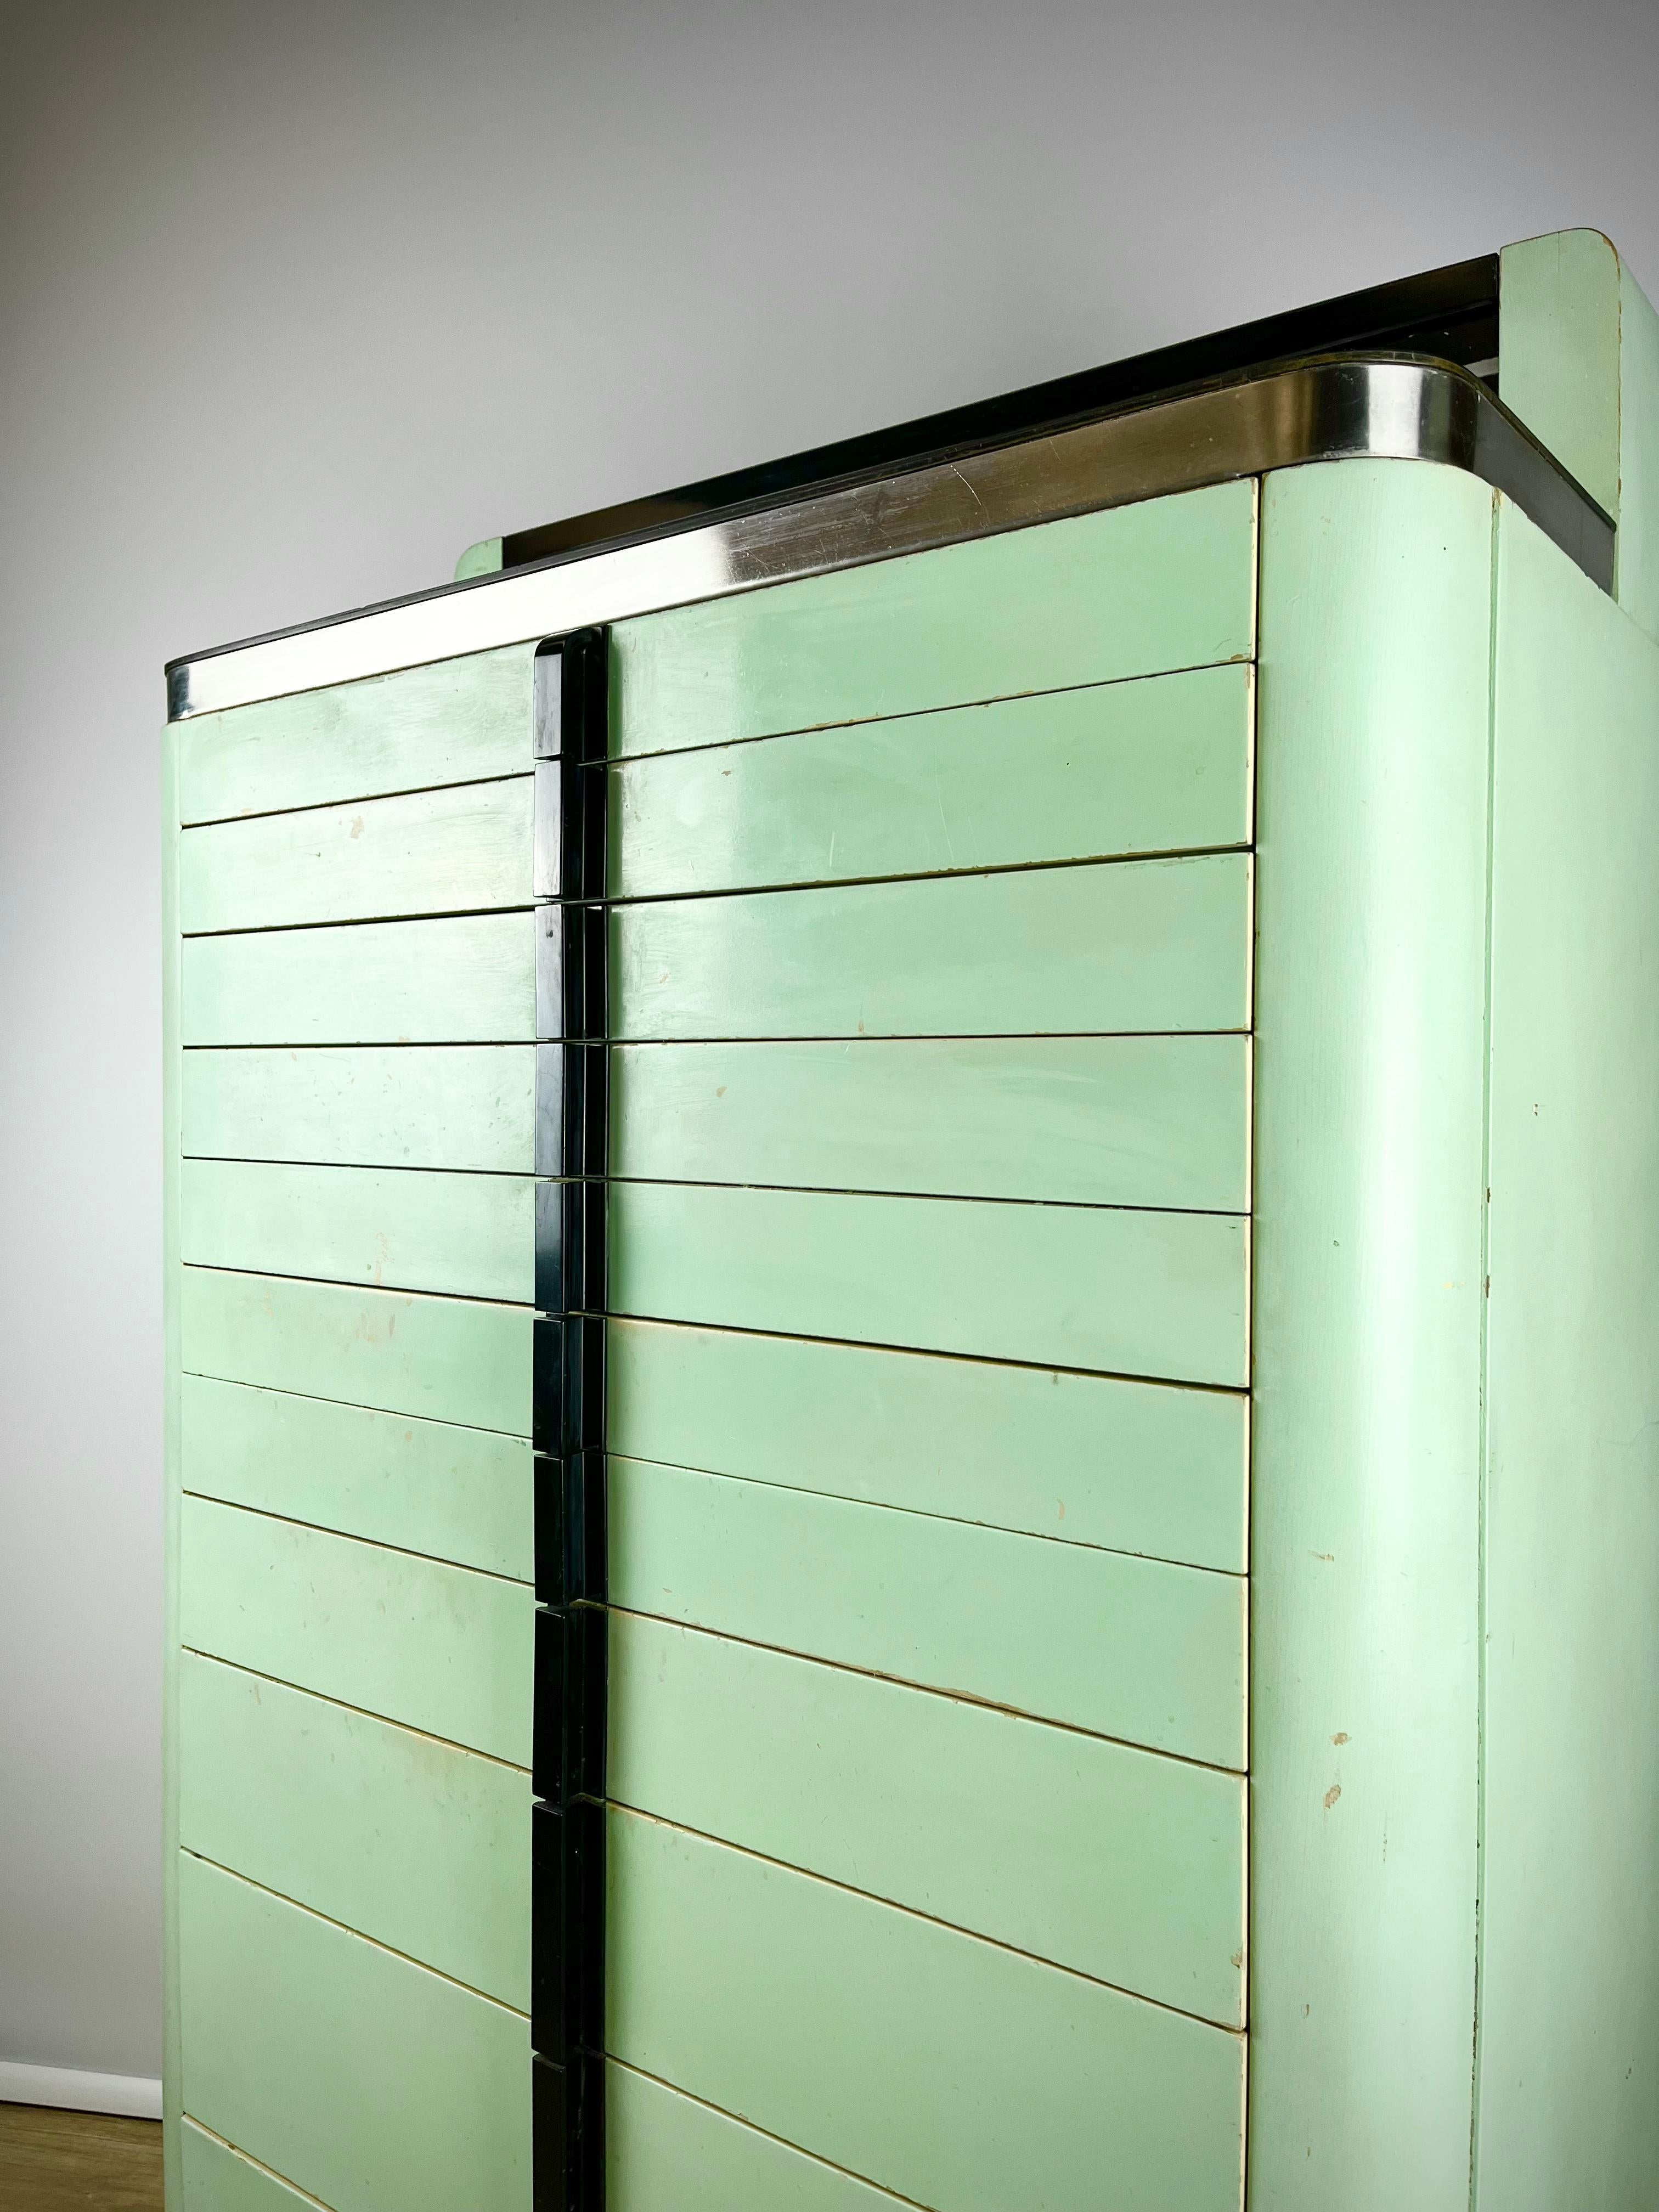 Father Time has been kind to this incredible Art Deco dentist’s cabinet…
Produced by The American Cabinet Co. in the 1930s, it has amazing colour and wear and features 10 drawers of varying sizes, as well as a hidden compartment in the top which